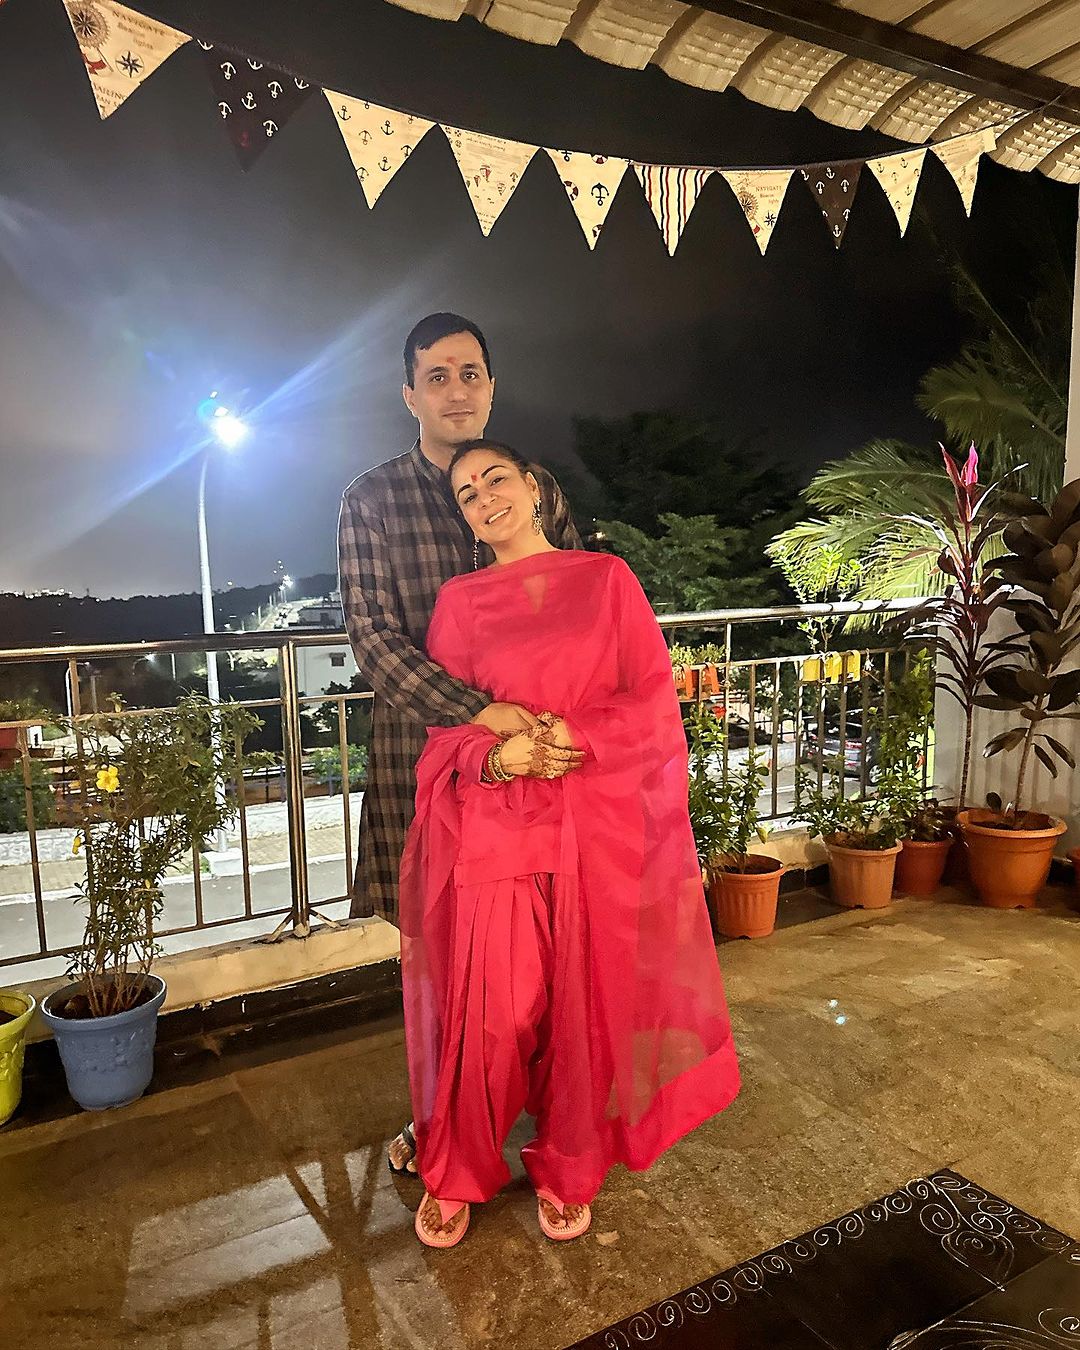 Exclusive! Gorgeous Actress Shraddha Arya Wows Her Fans' Hearts By Sharing Adorable Karwa Chauth Celebration Pictures With Her Husband Rahul Nagal - Supriya Shukla Reacts On It!